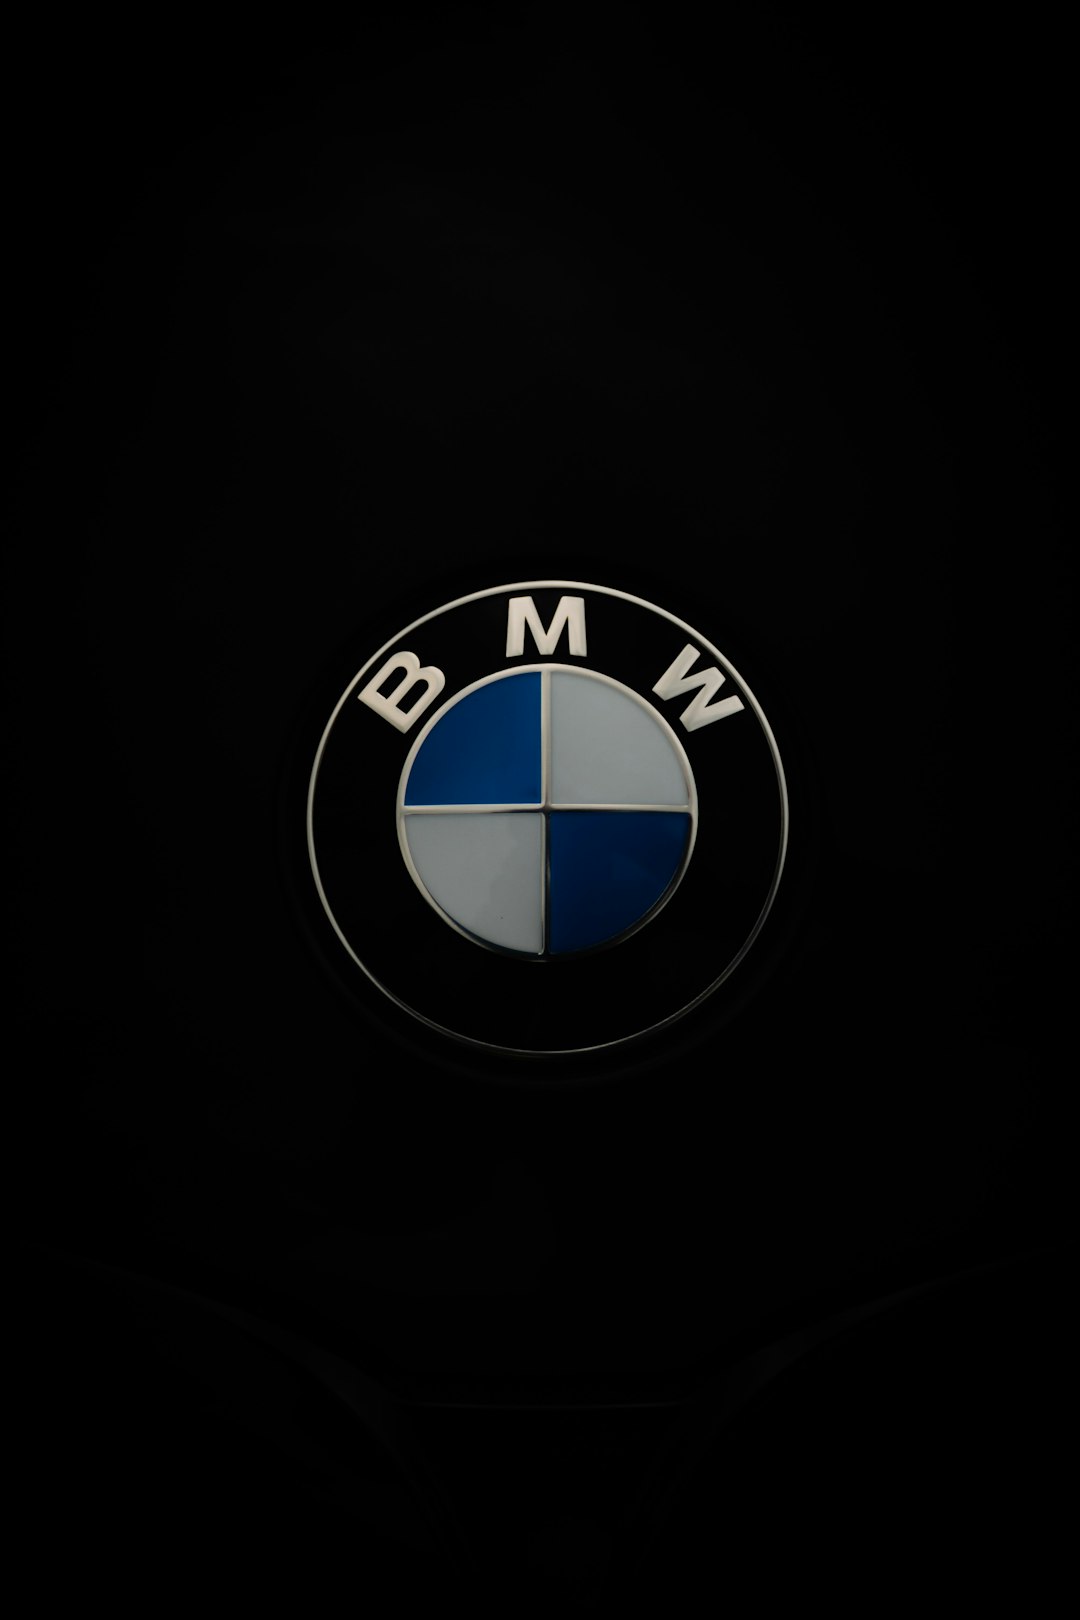 The BMW M8 is a high-performance luxury car known for its powerful engine and sleek design.